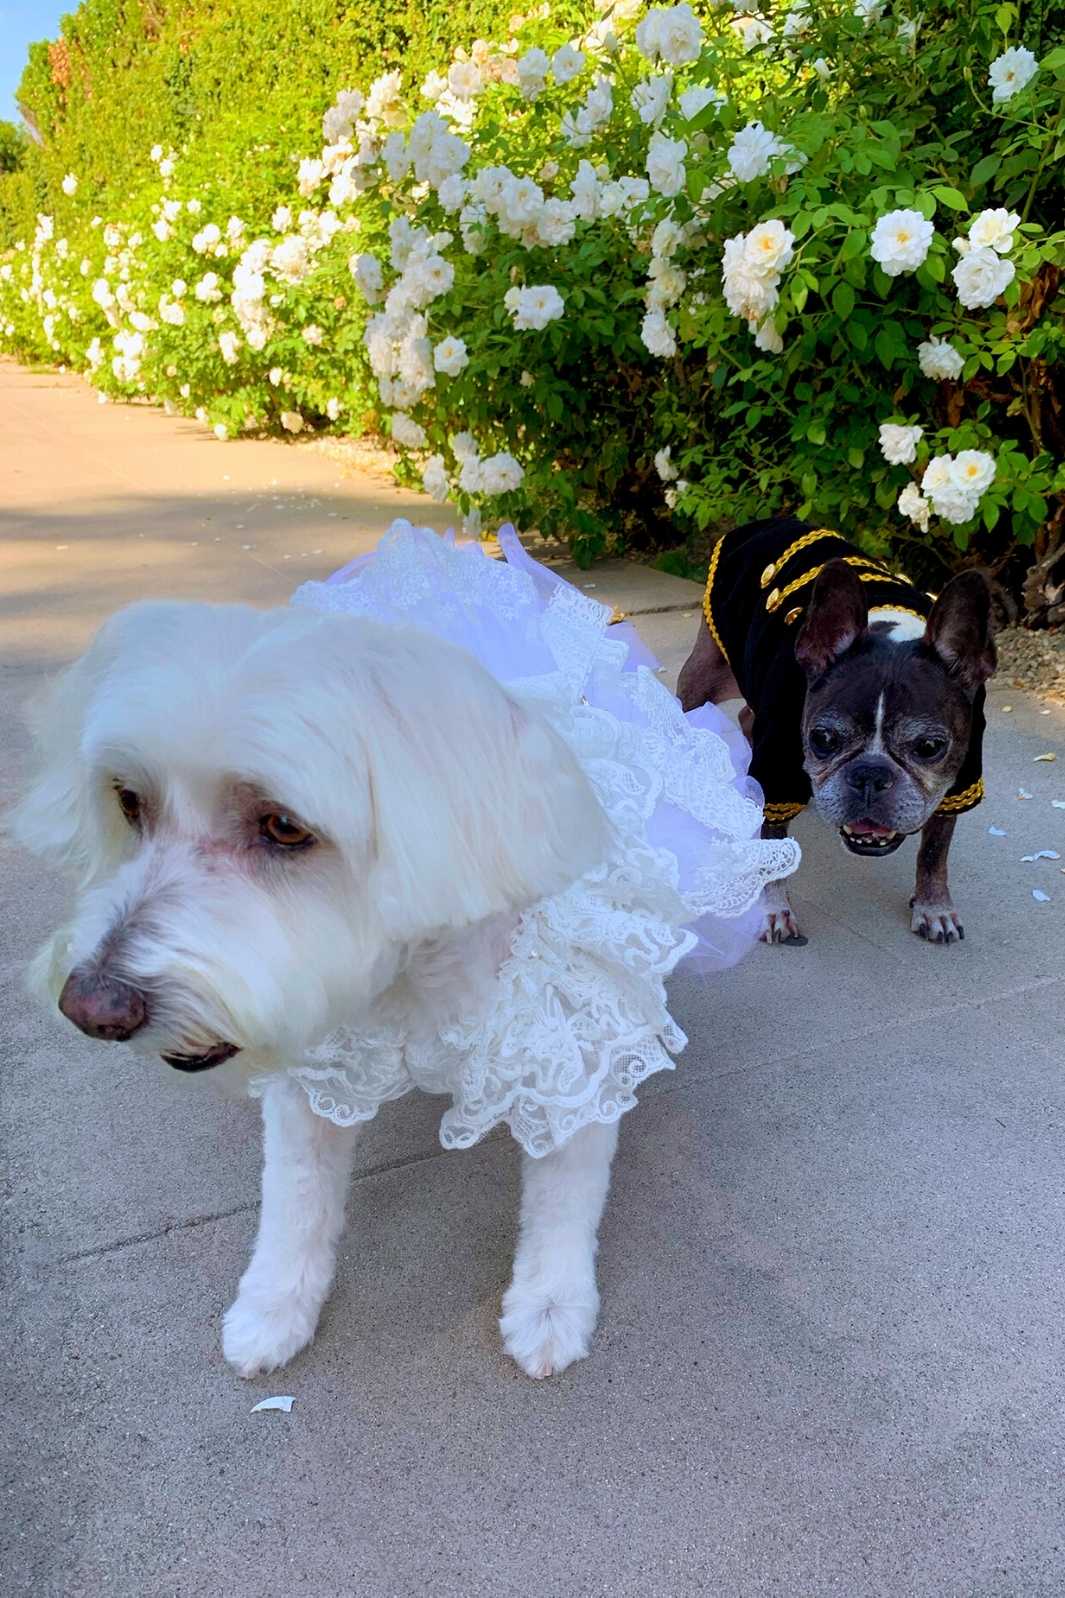 Willow, Bichon Frise, Maltese & Havanese mix, and Dilla, French Bulldog and Boston Terrier mix, wearing luxury dog clothes from online posh puppy boutique they made me wear it on National Dress Up Your Pet Day.